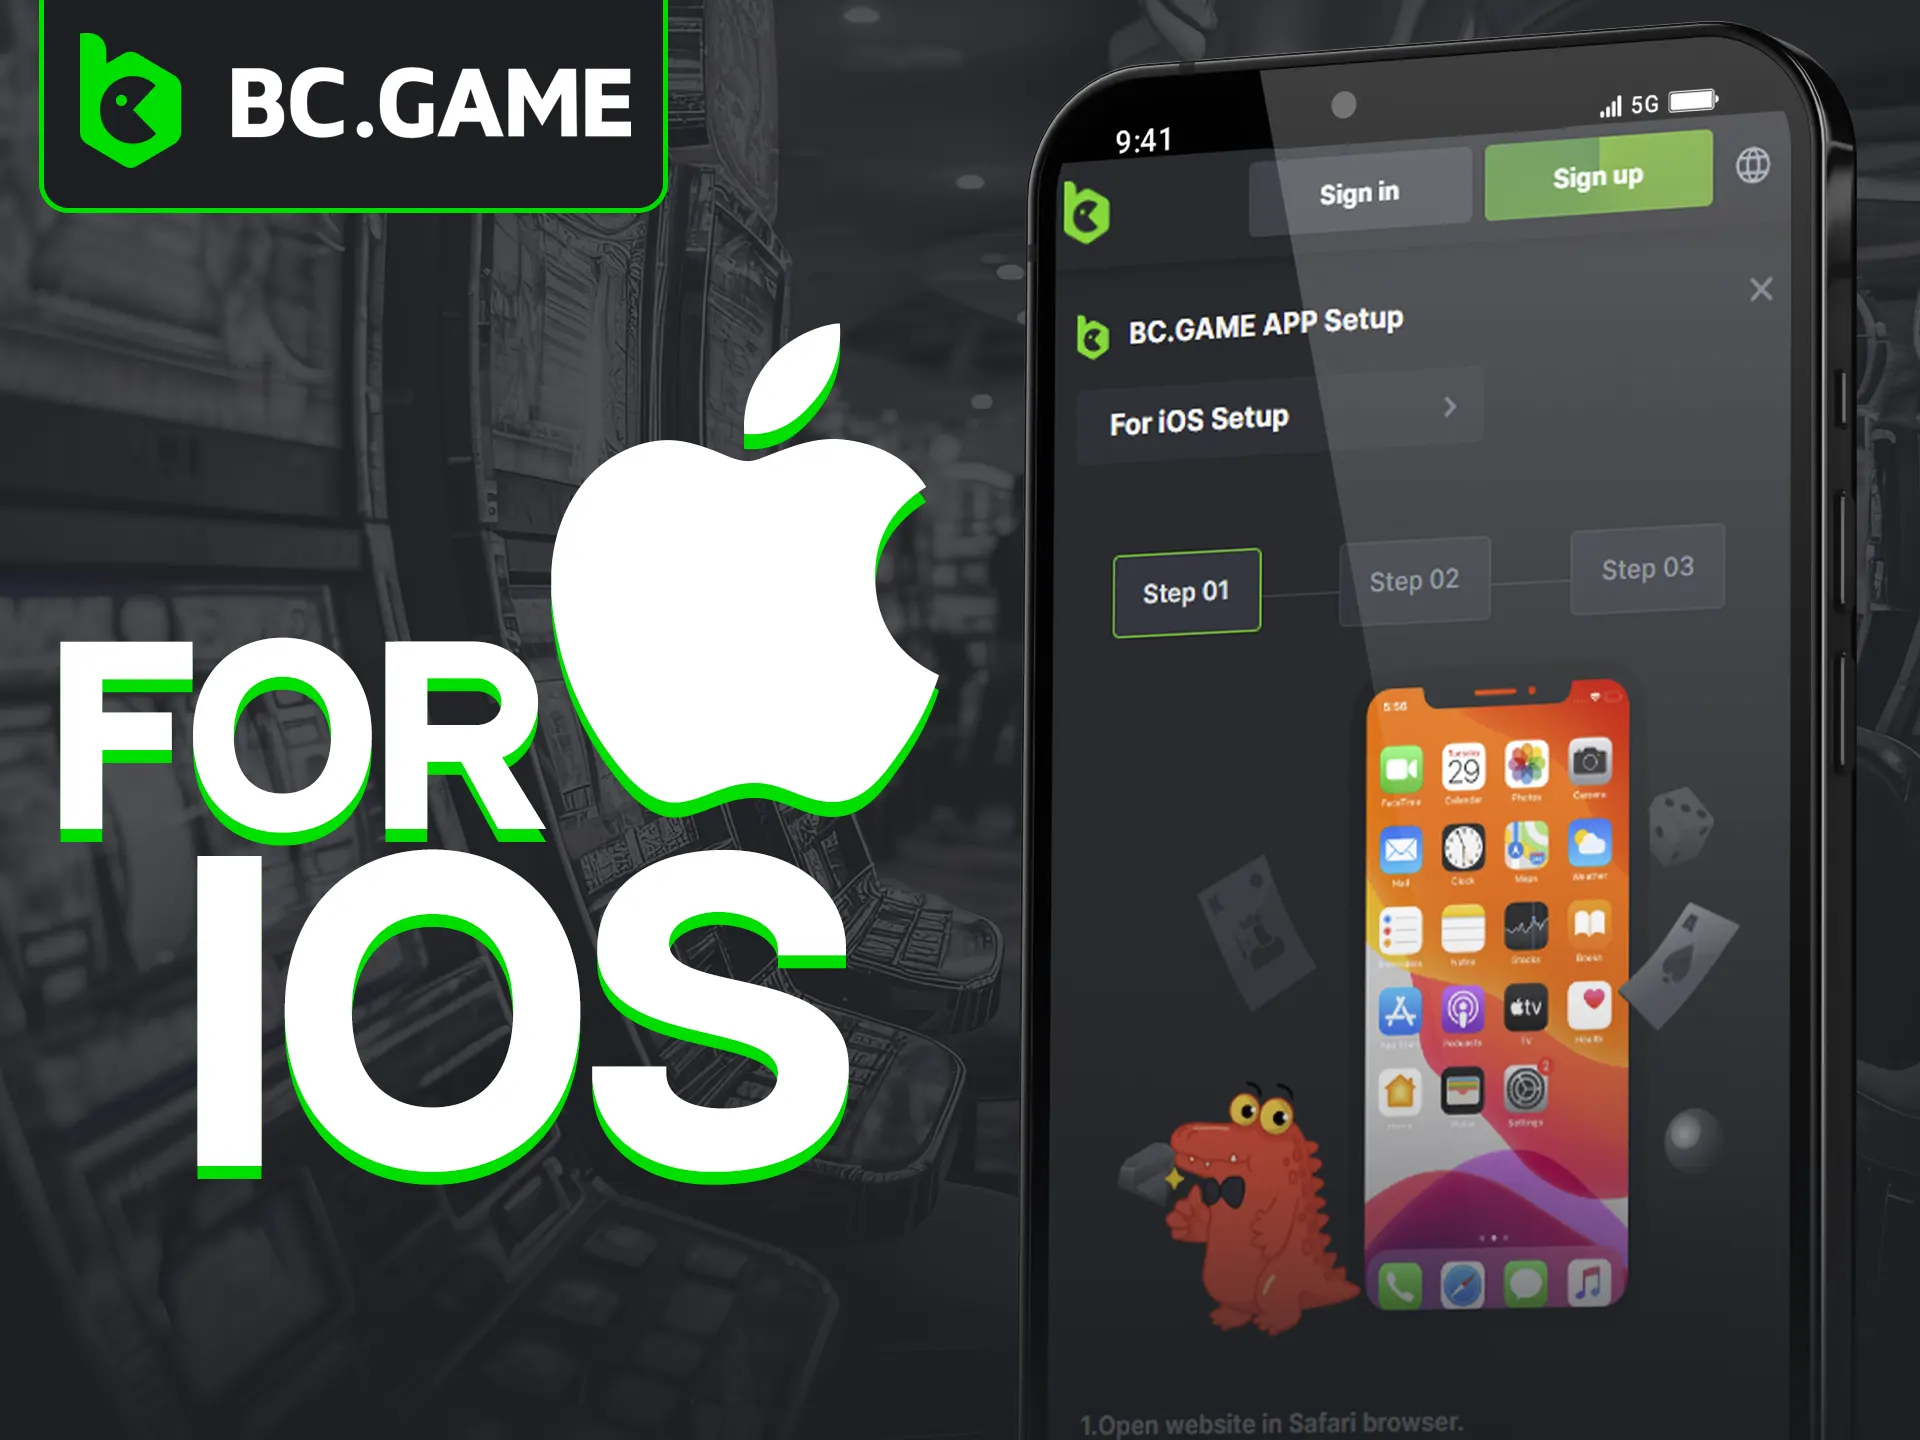 BC Game's iOS app offers seamless gaming experience.